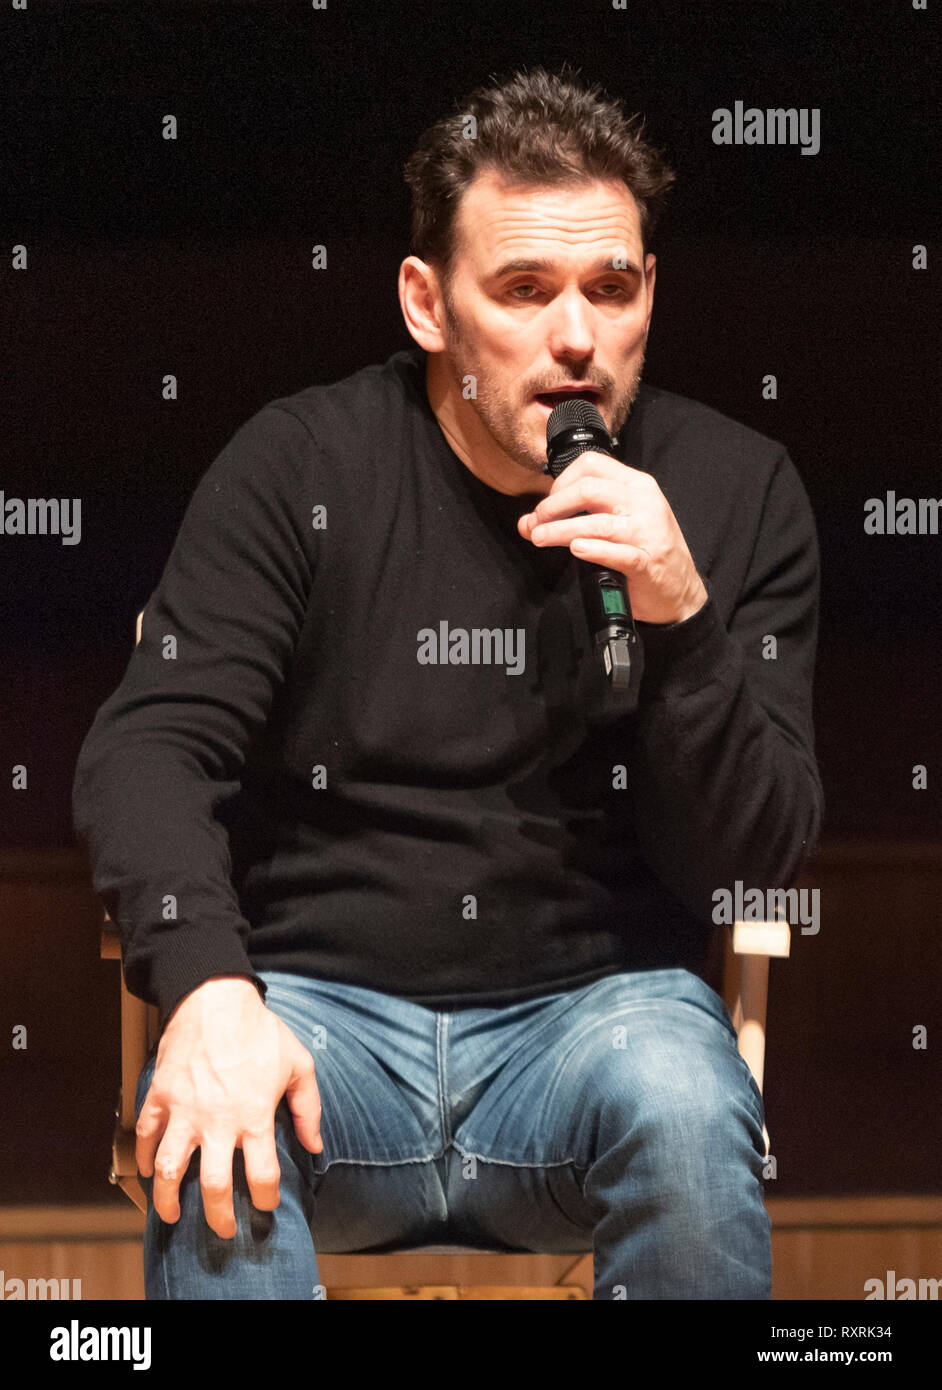 Lausanne, Switzerland. 10th March, 2019. Meeting with Matt Dillon, the American actor at the meetings of the 7th art in Lausanne, Switzerland on the 10-03-2019. Credit: Eric Dubost/Alamy Live News Stock Photo